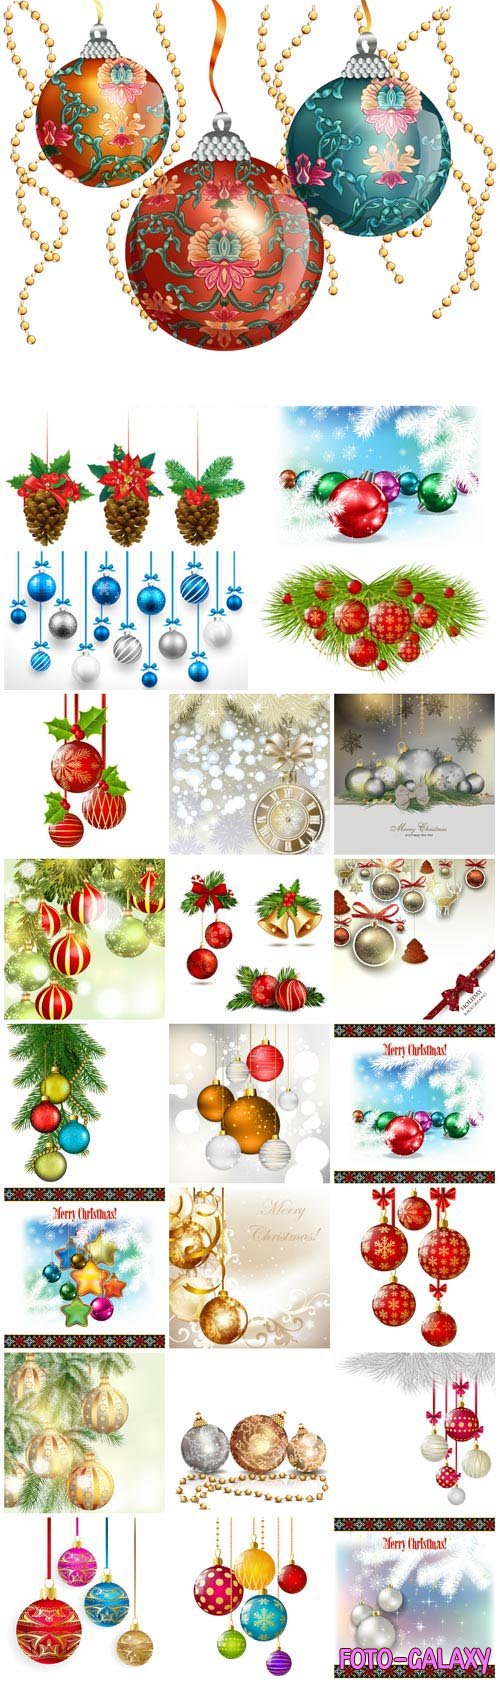 New Year and Christmas illustrations in vector 49